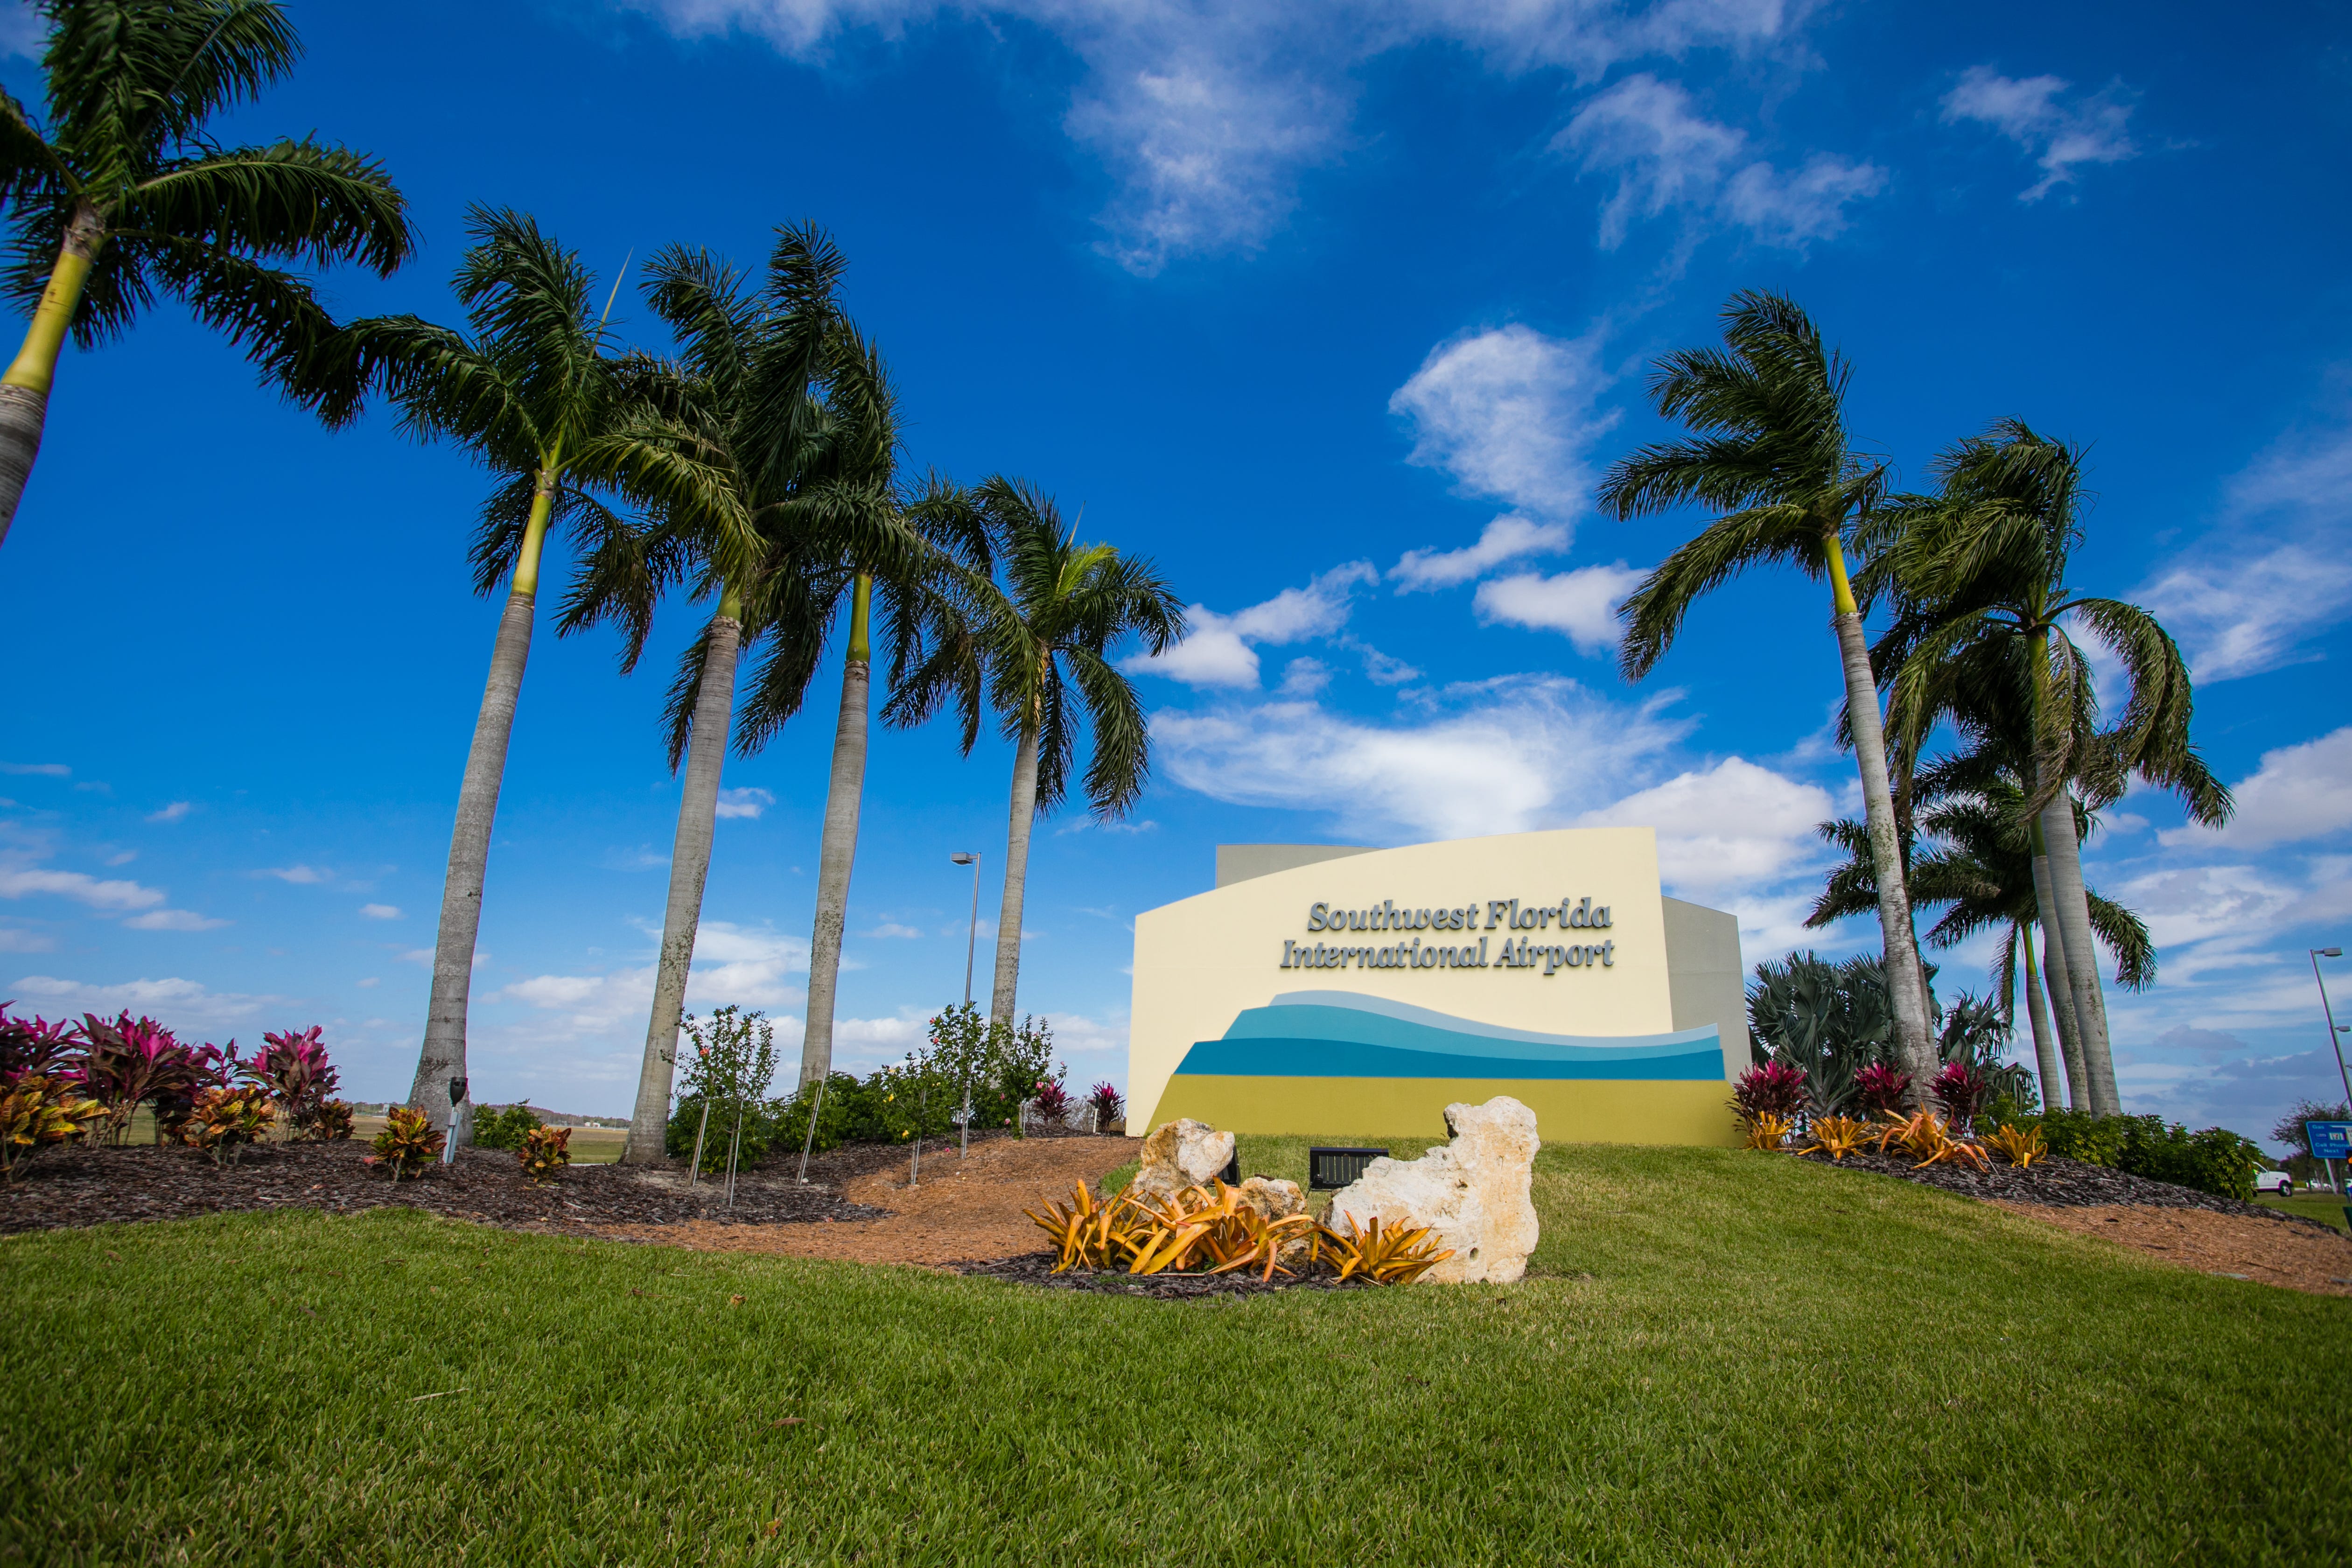 Photo of the Southwest Florida International Airport entrance sign.